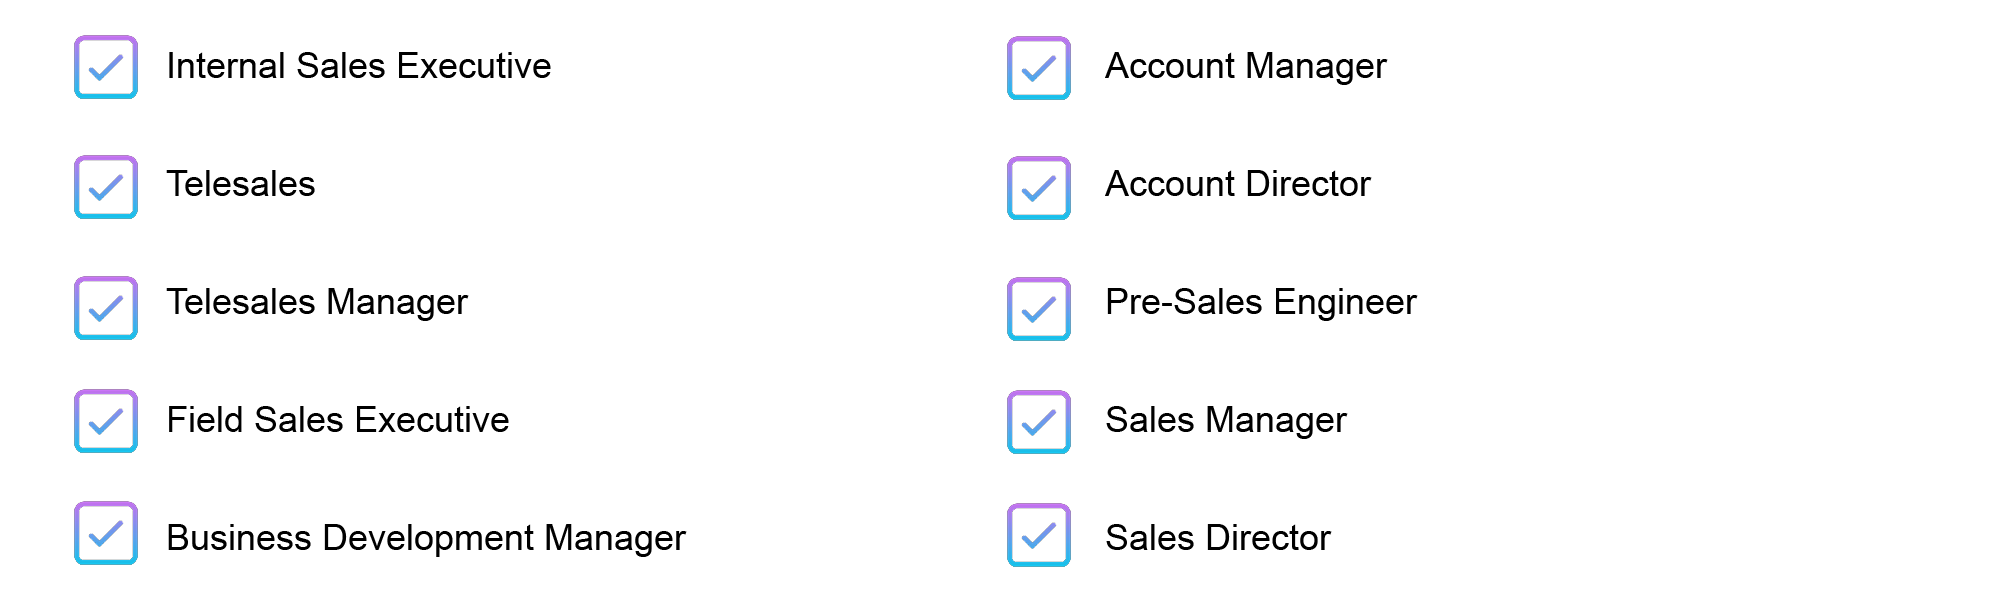 List of sales roles including internal sales executive, telesales, telesales manager, field sales executive, business development manager, account manager, account director, pre-sales engineer, sales manager and sales director